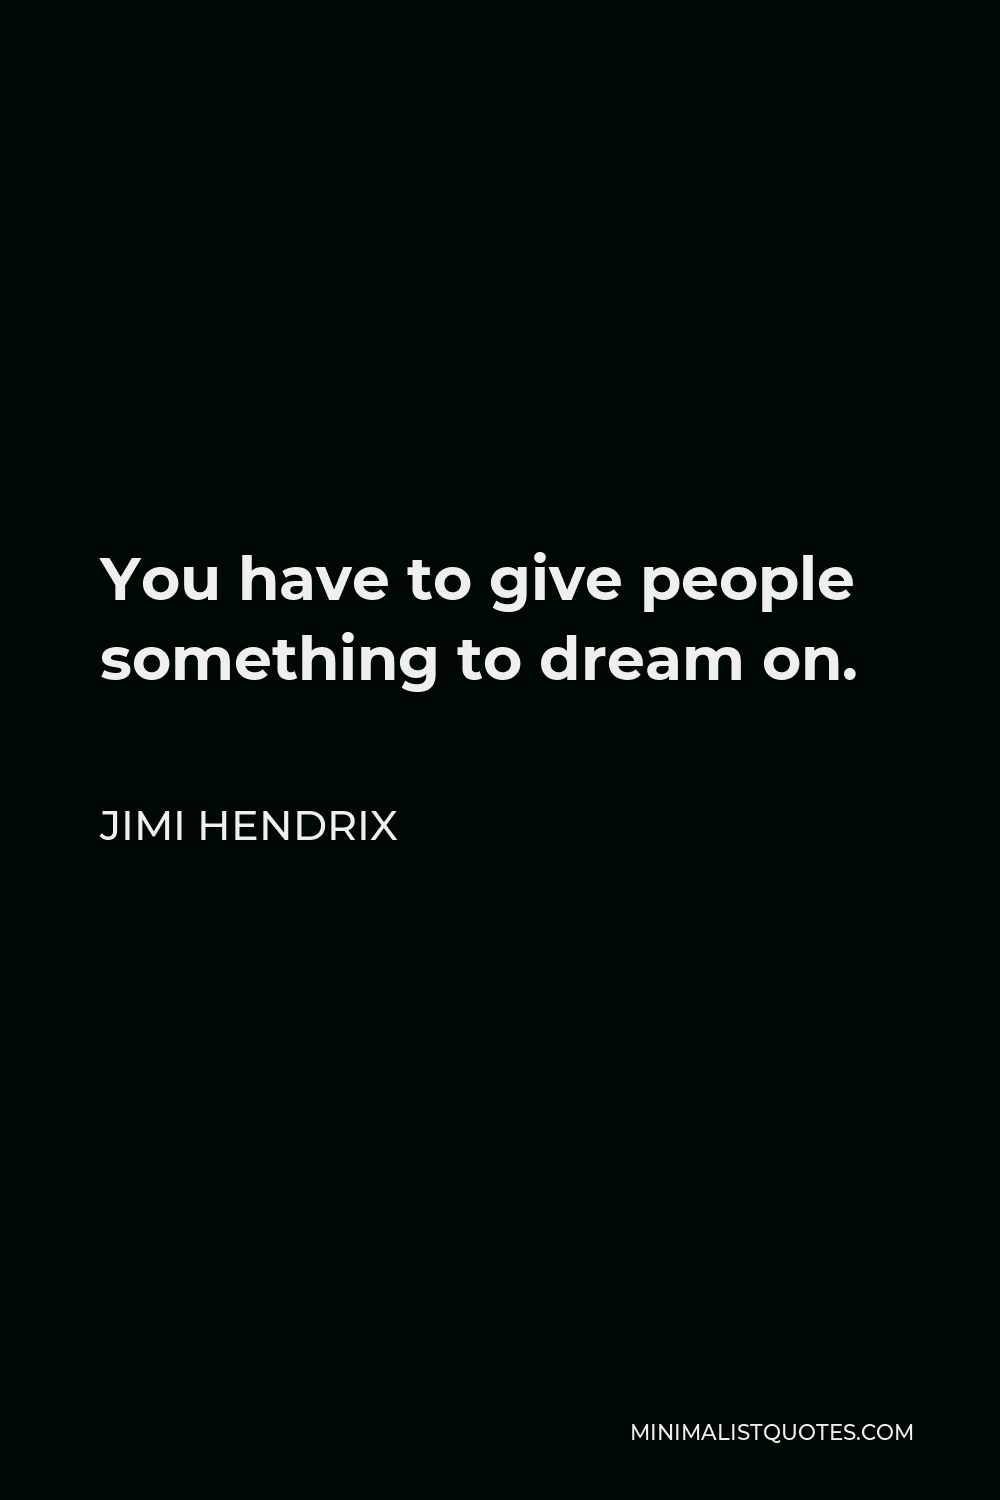 Jimi Hendrix Quote - You have to give people something to dream on.